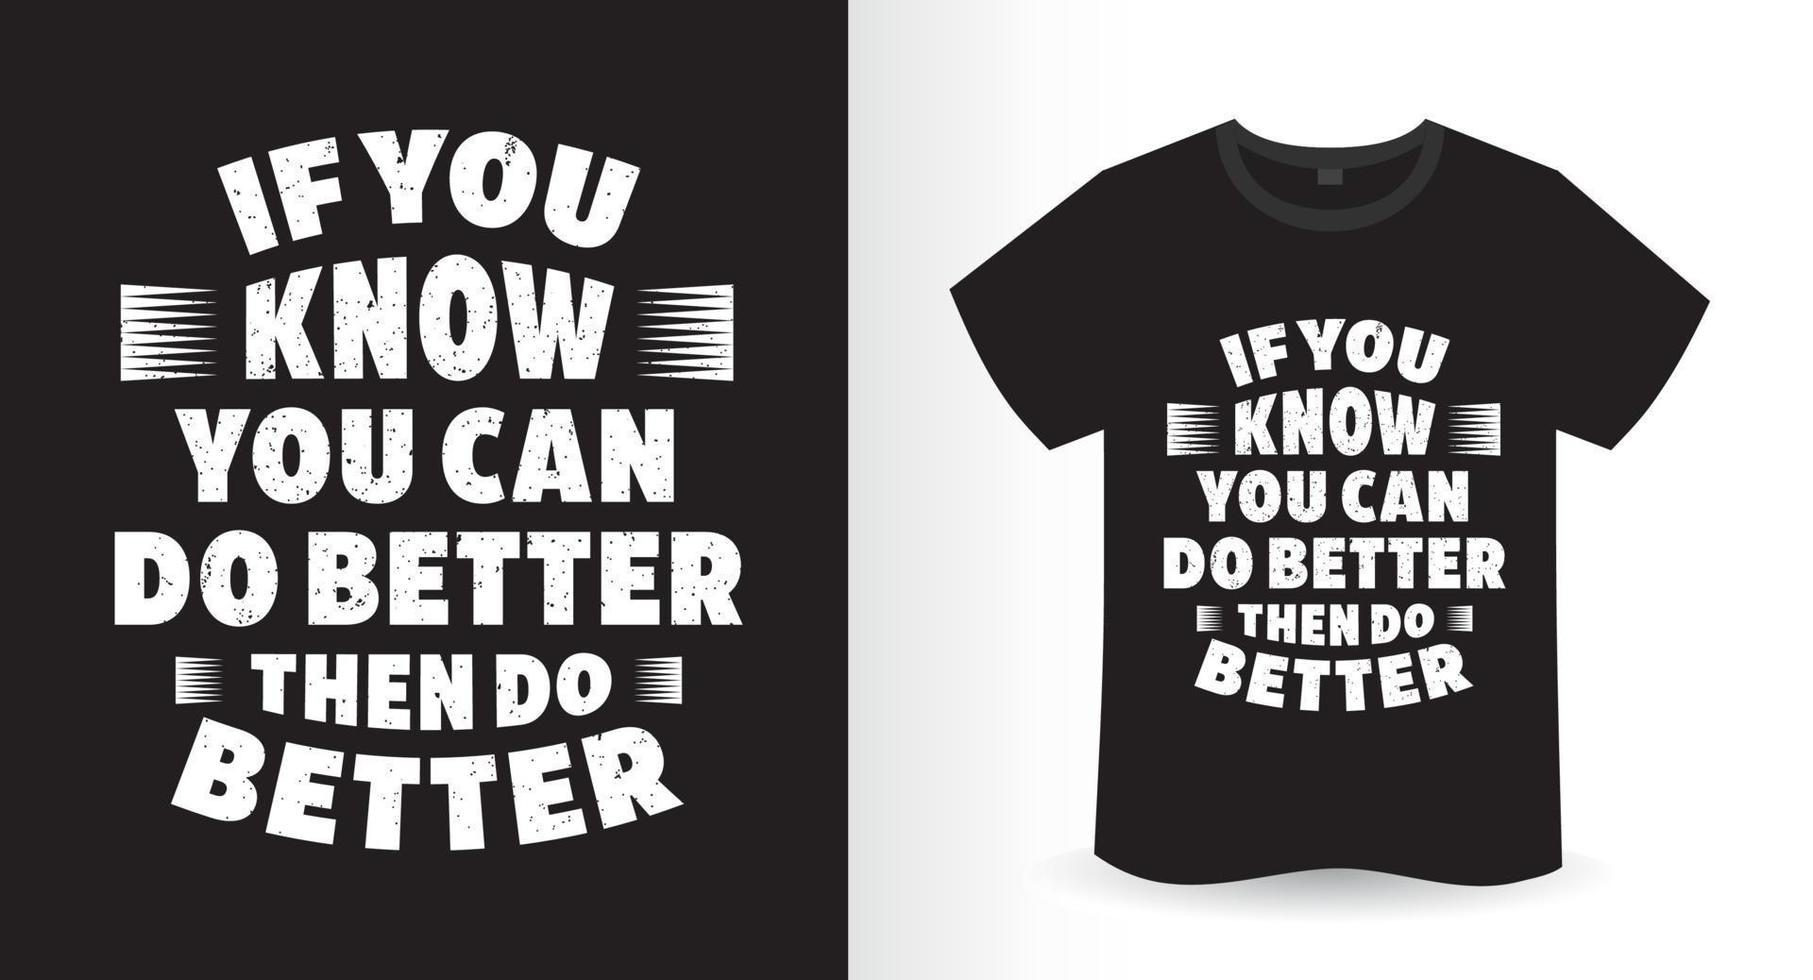 If you know you can do better then do better typography t-shirt design vector